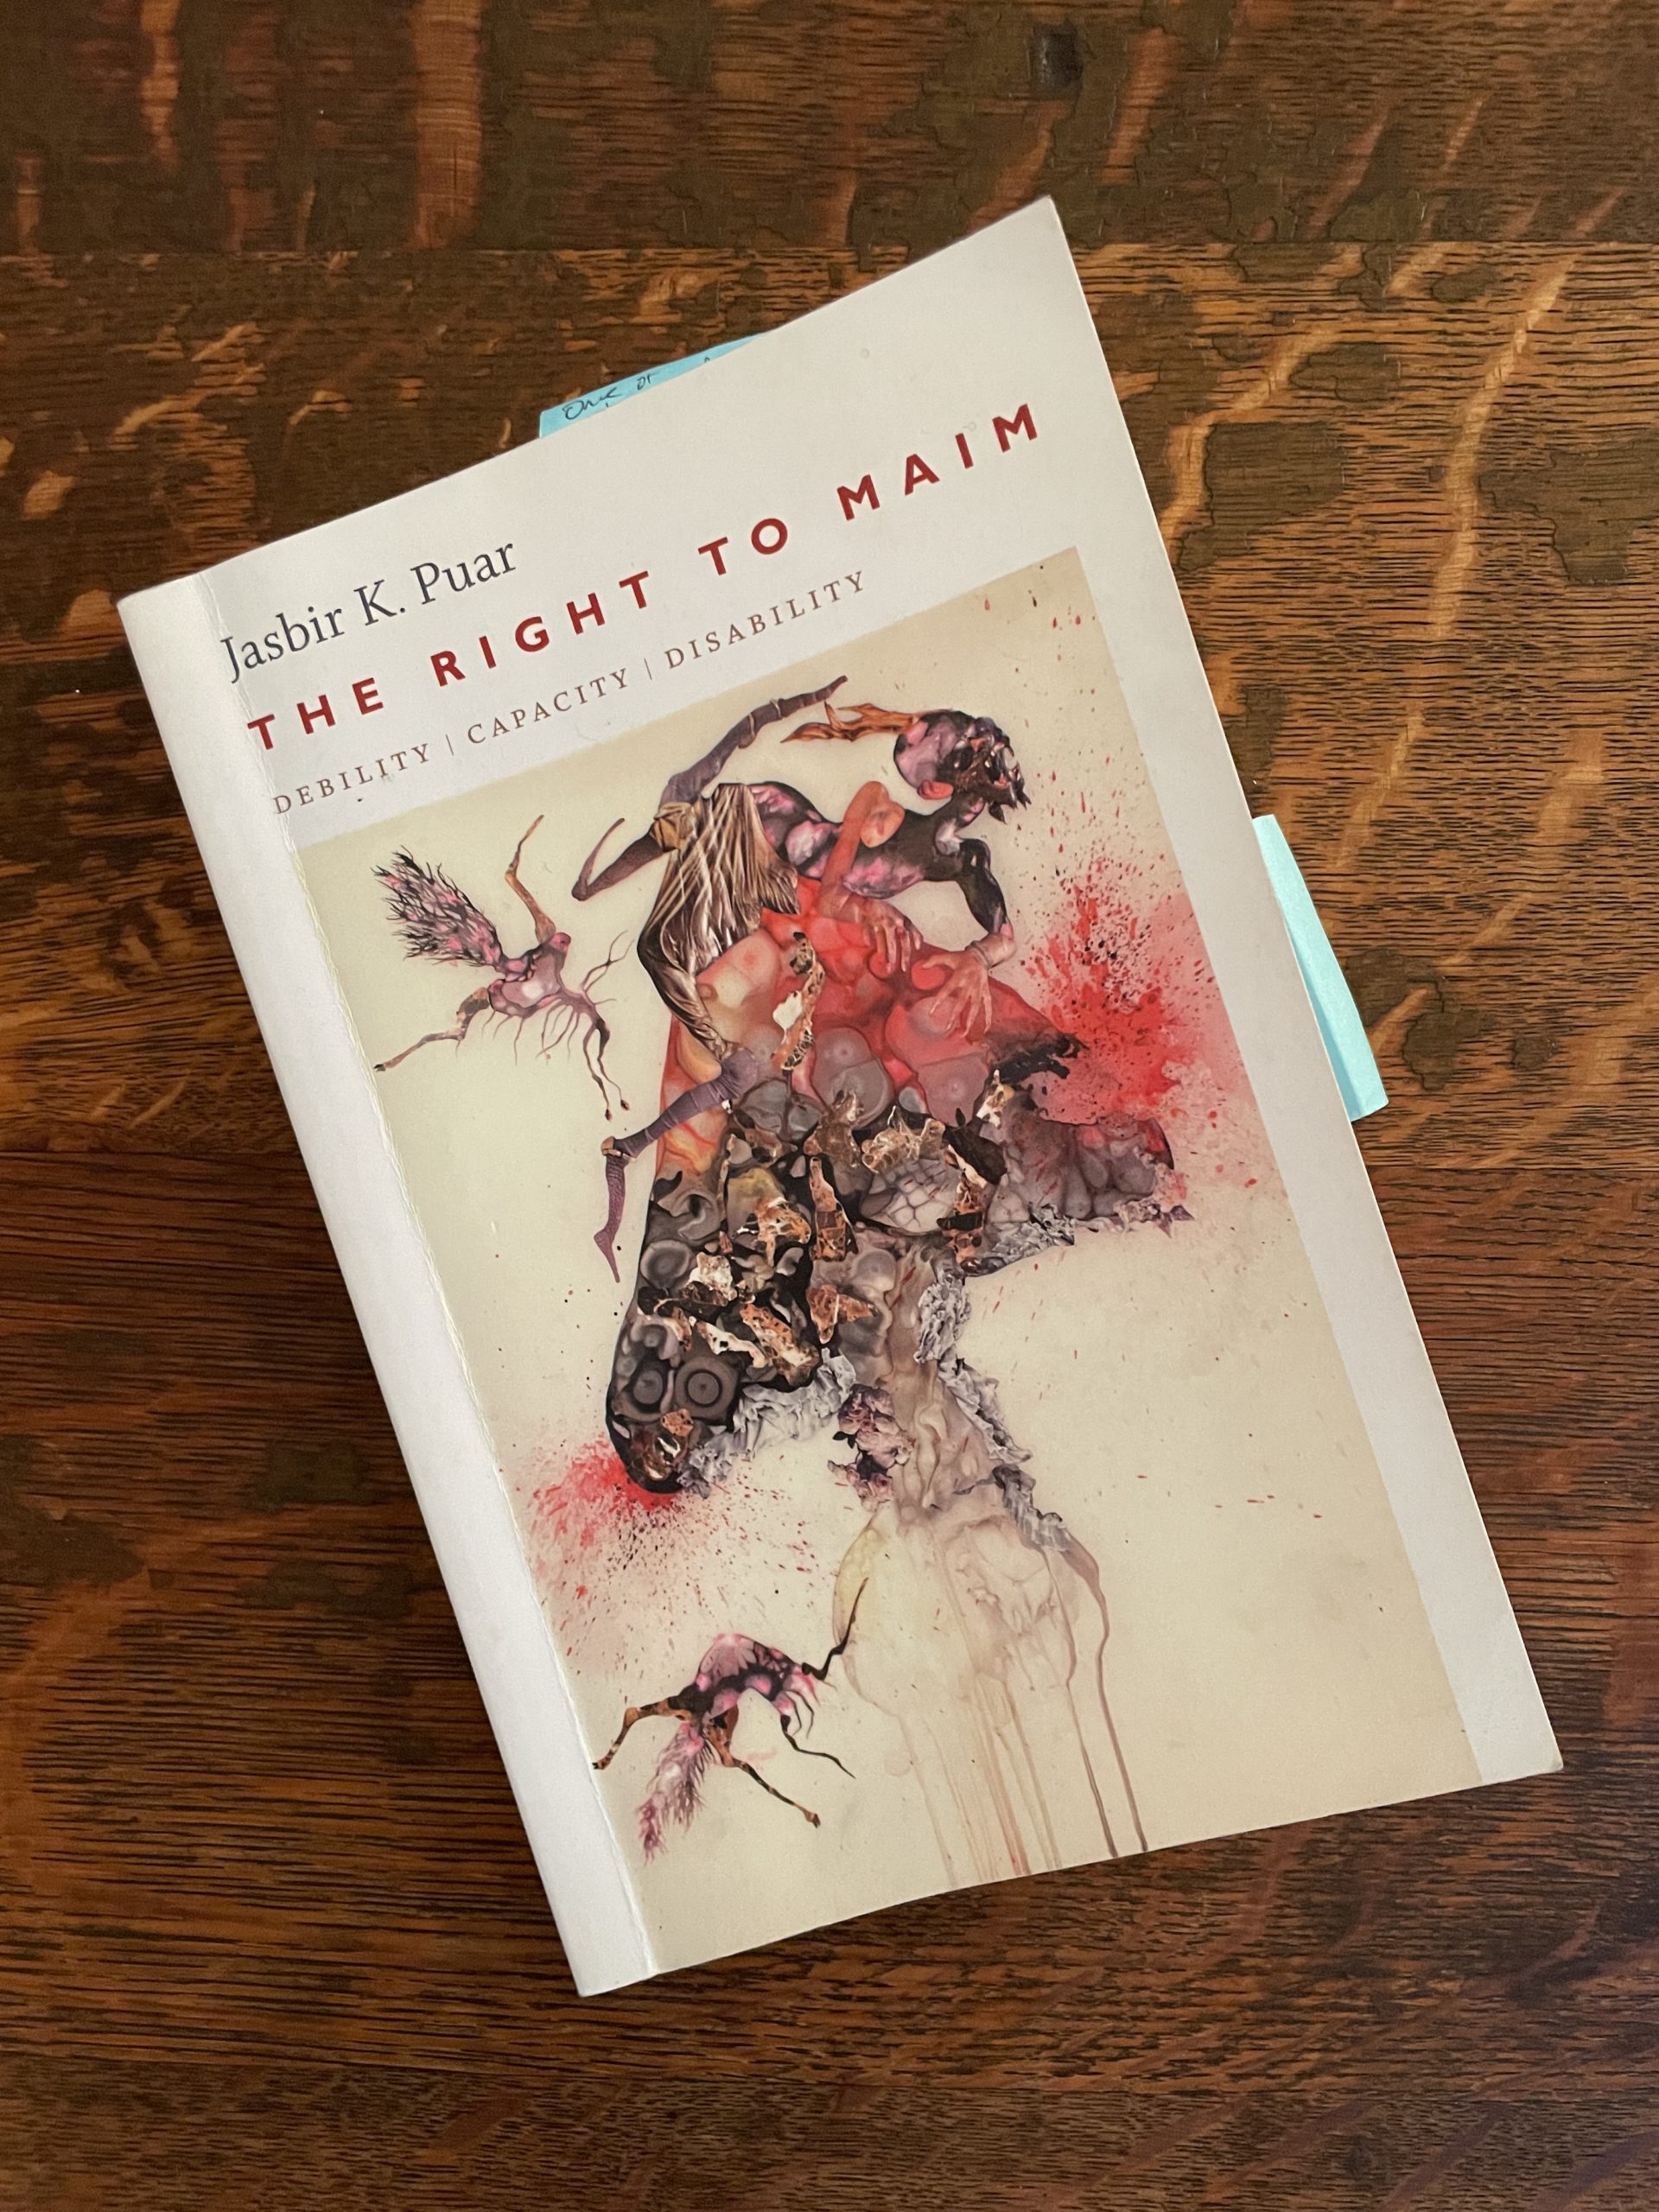 A snapshop of the cover of Jasbir Puar's book The Right to Maim.